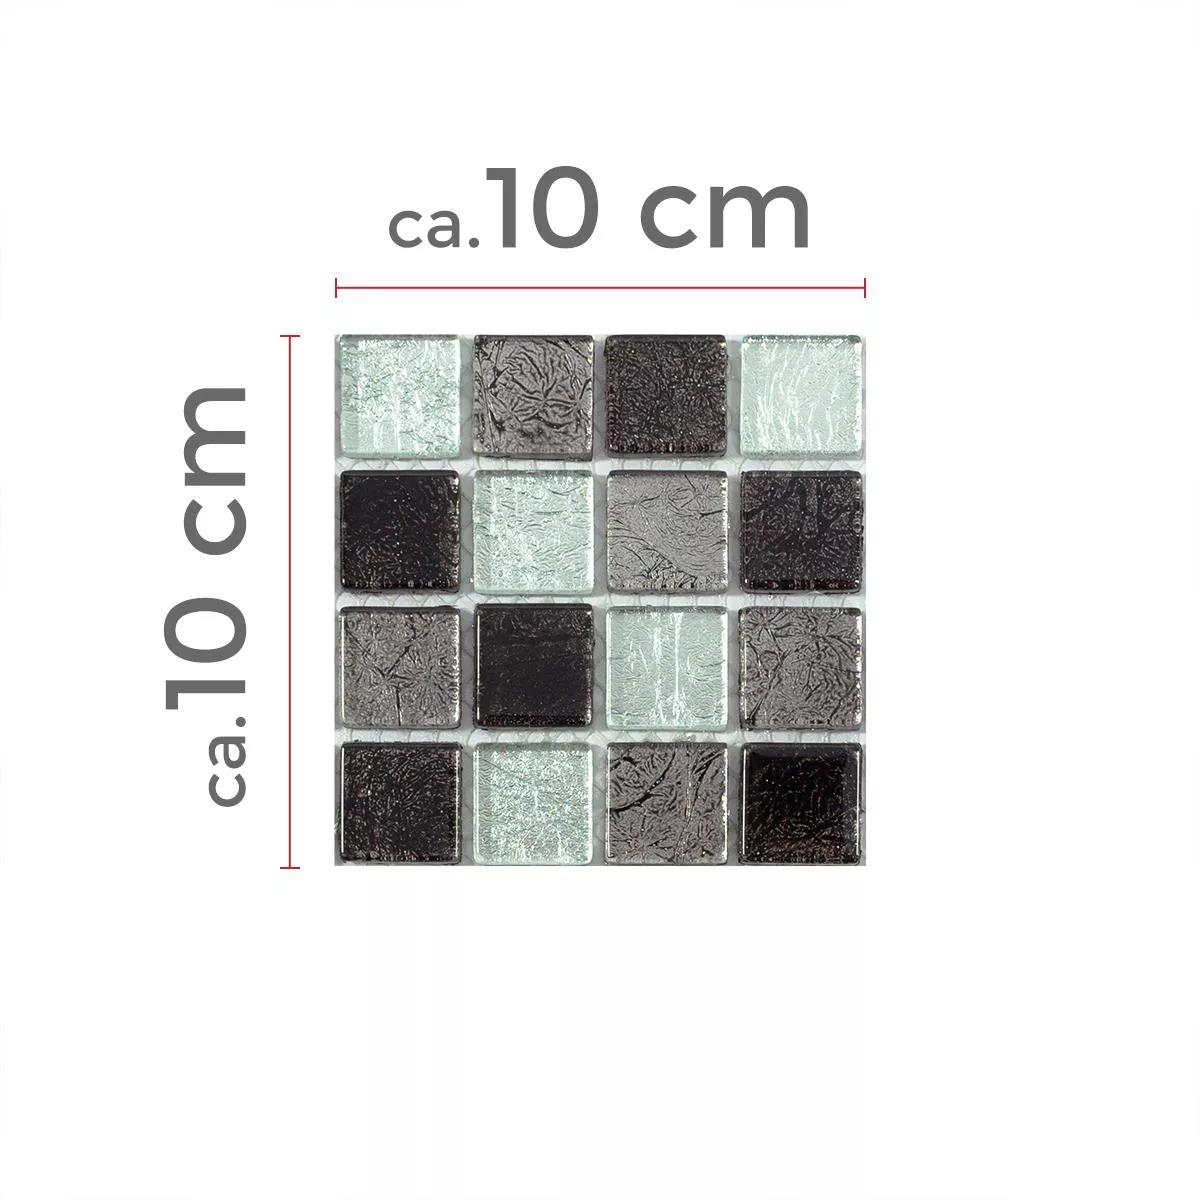 Sample Mosaic Tiles Glass Bonnie Crystal Structure Black Silver Grey